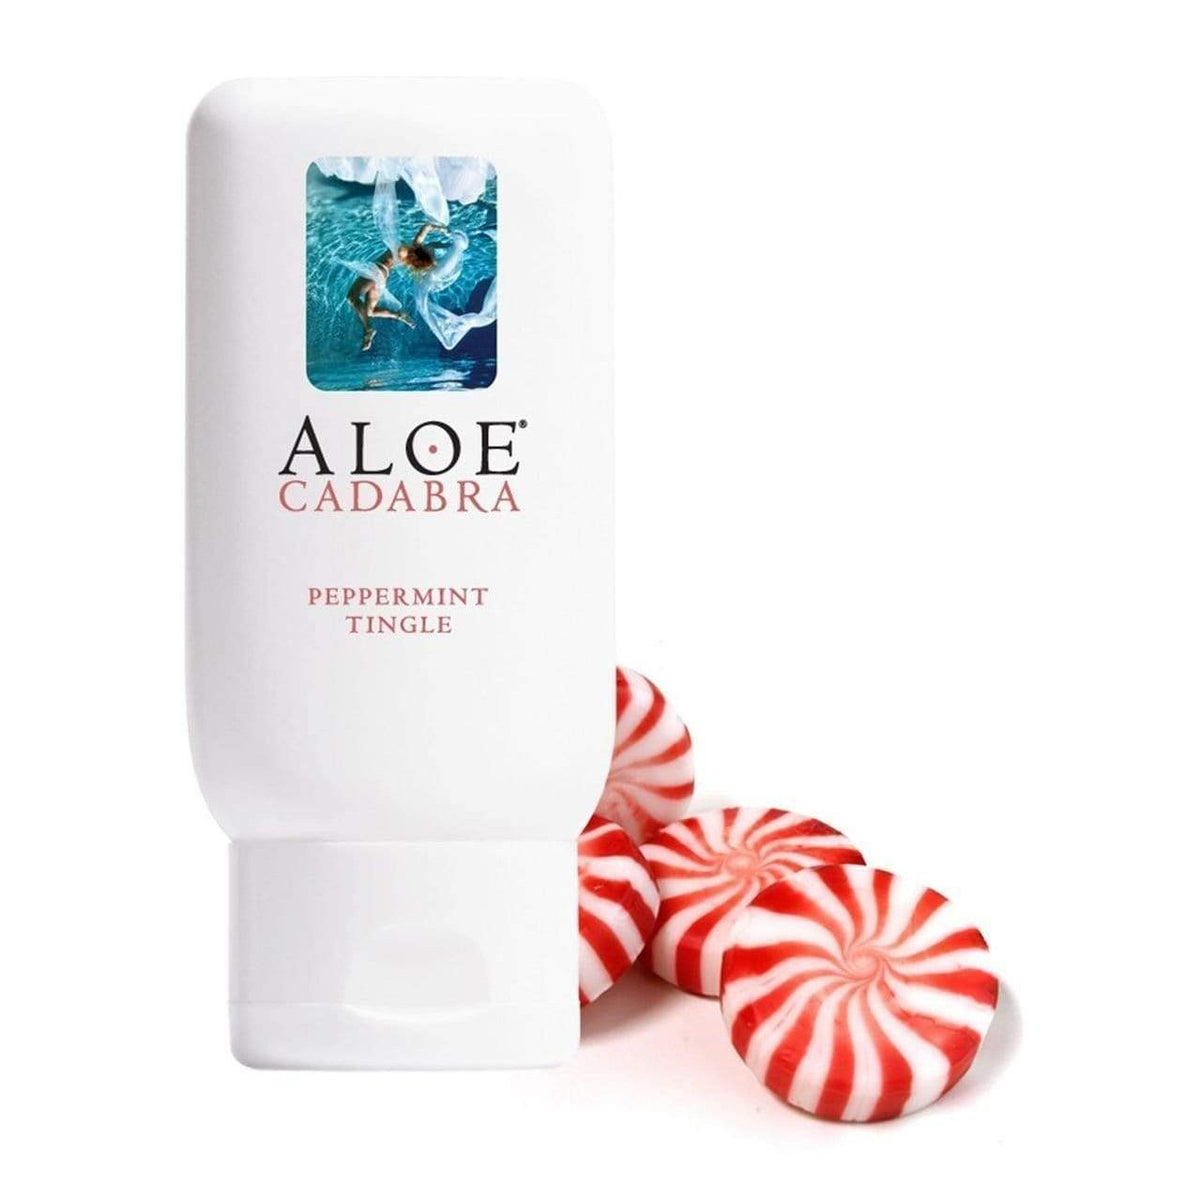 Aloe Cadabra - Organic Lubricant Flavoured / Natural  Peppermint 826804006457 Lube (Water Based)